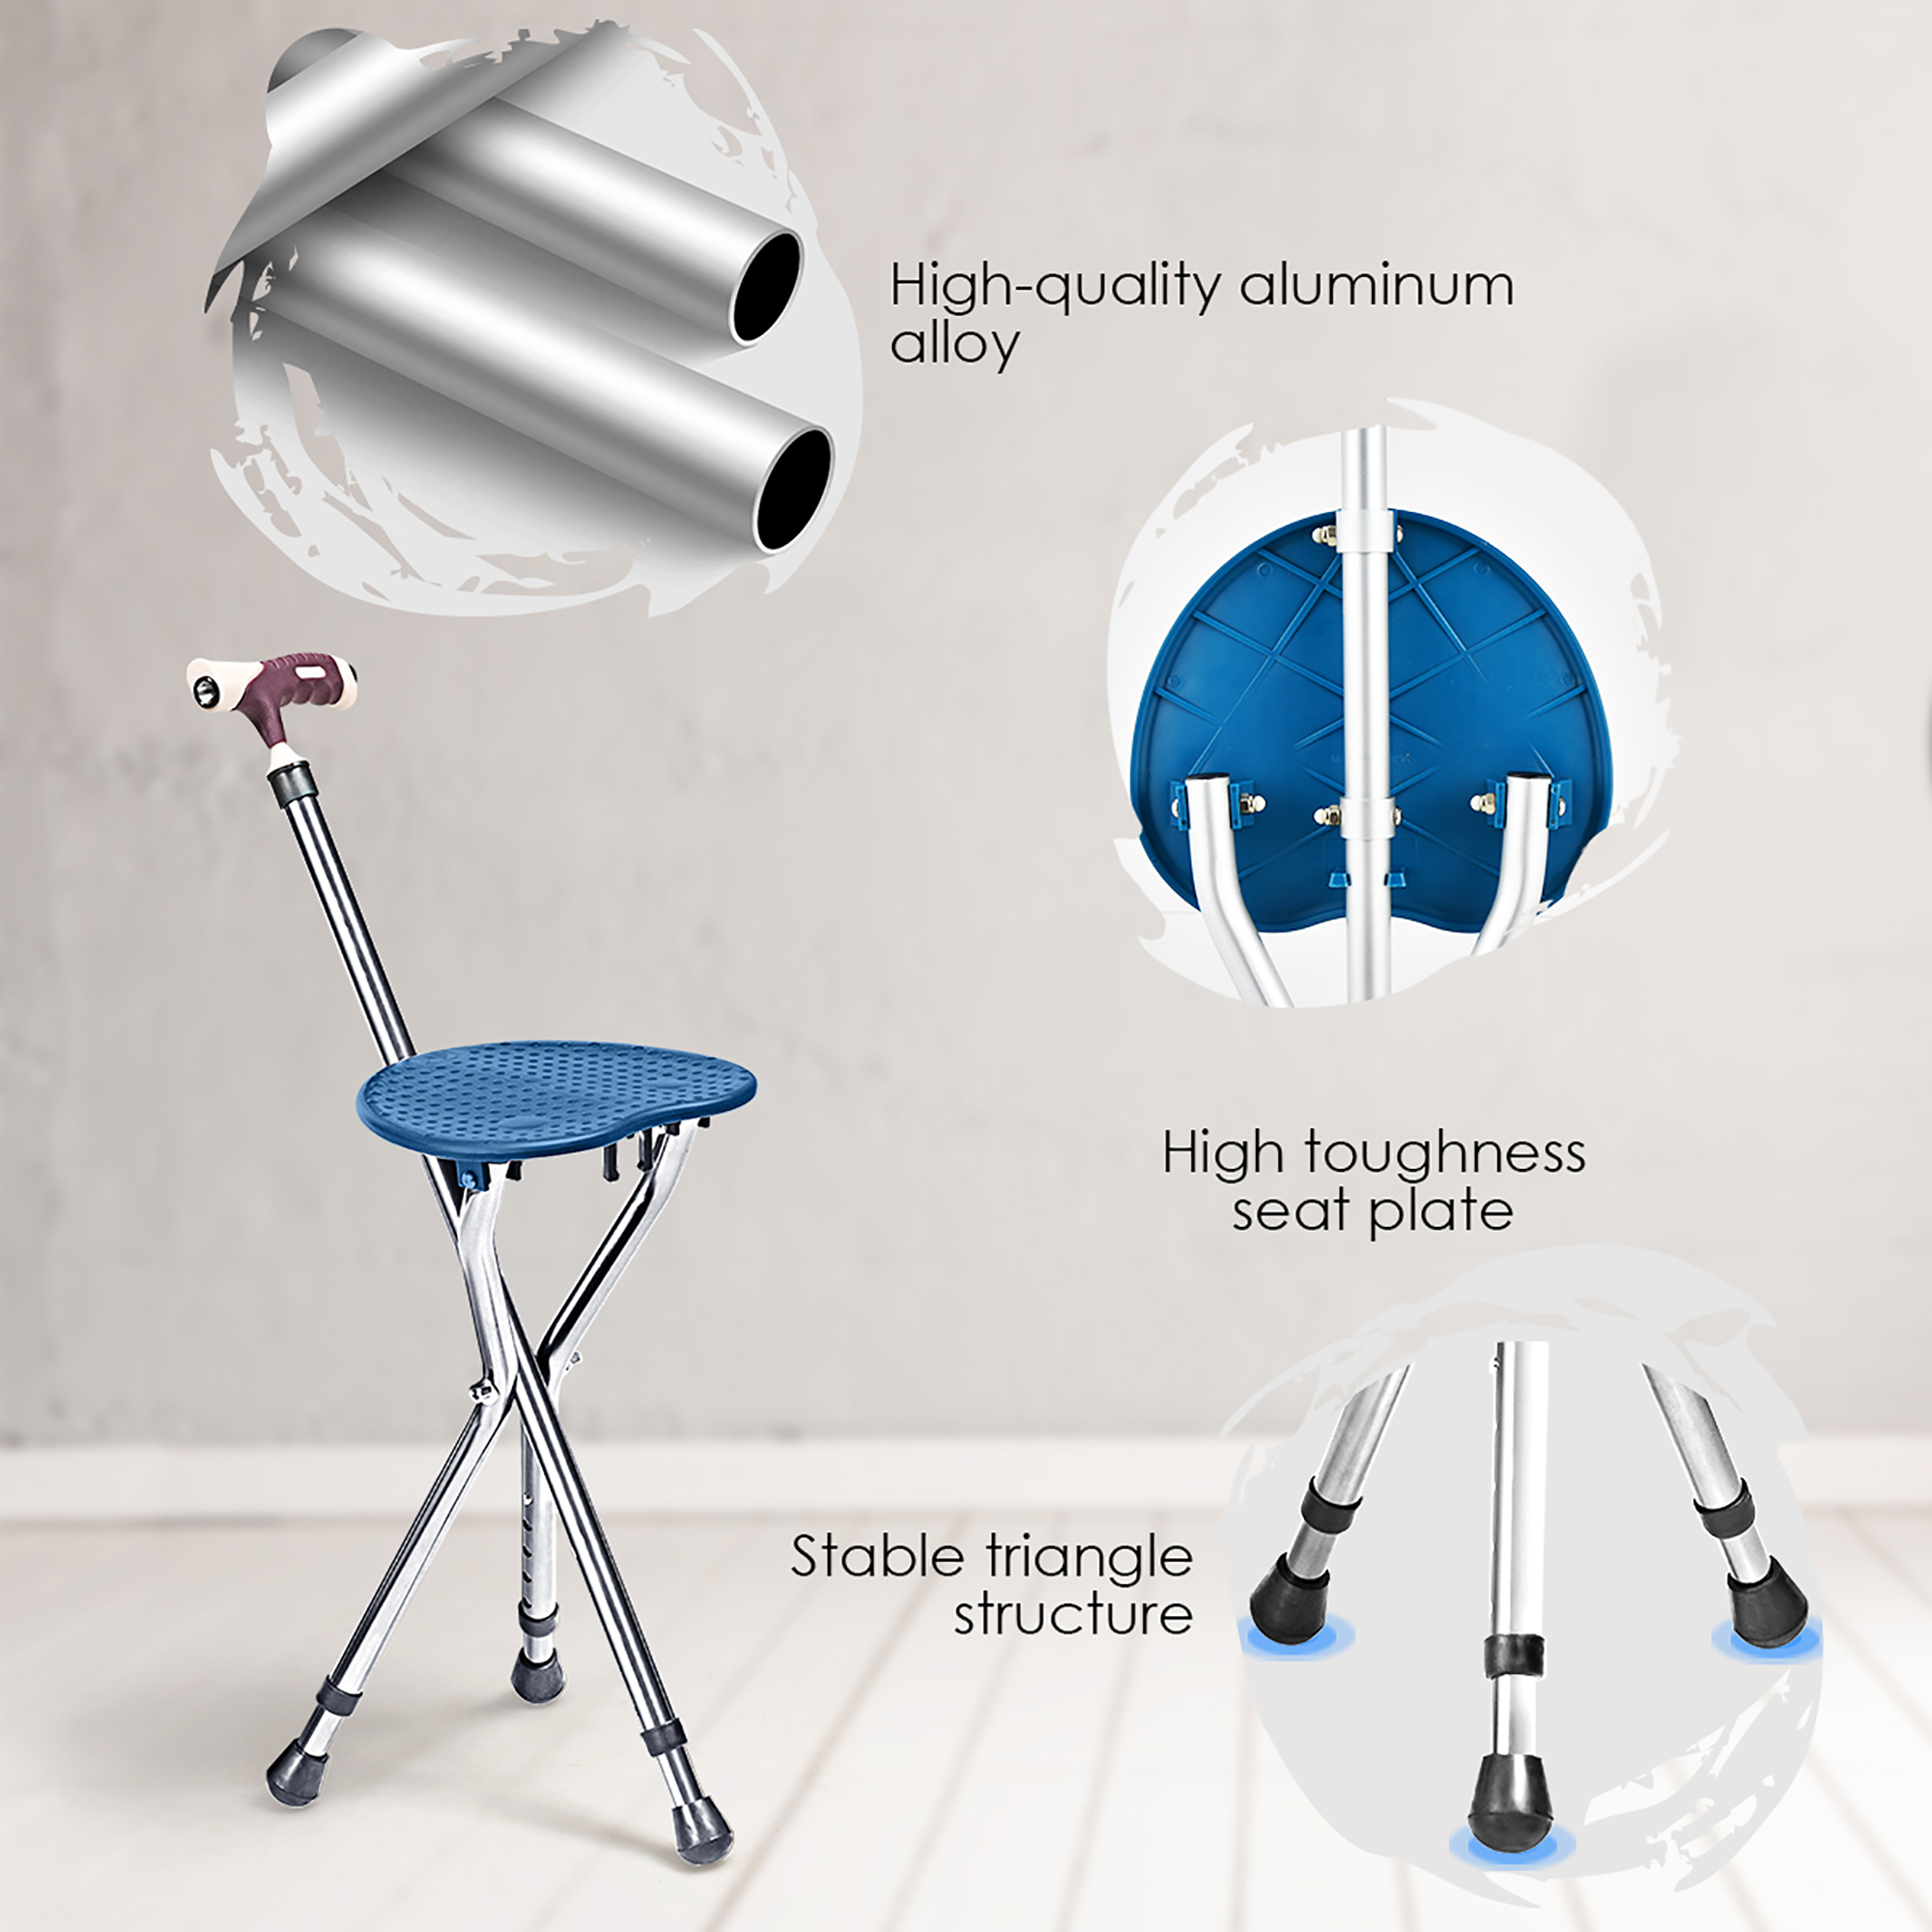 Goplus Adjustable Folding Cane Outdoor Seat Stool Aluminum Alloy Crutch Chair with Light Blue - image 5 of 10